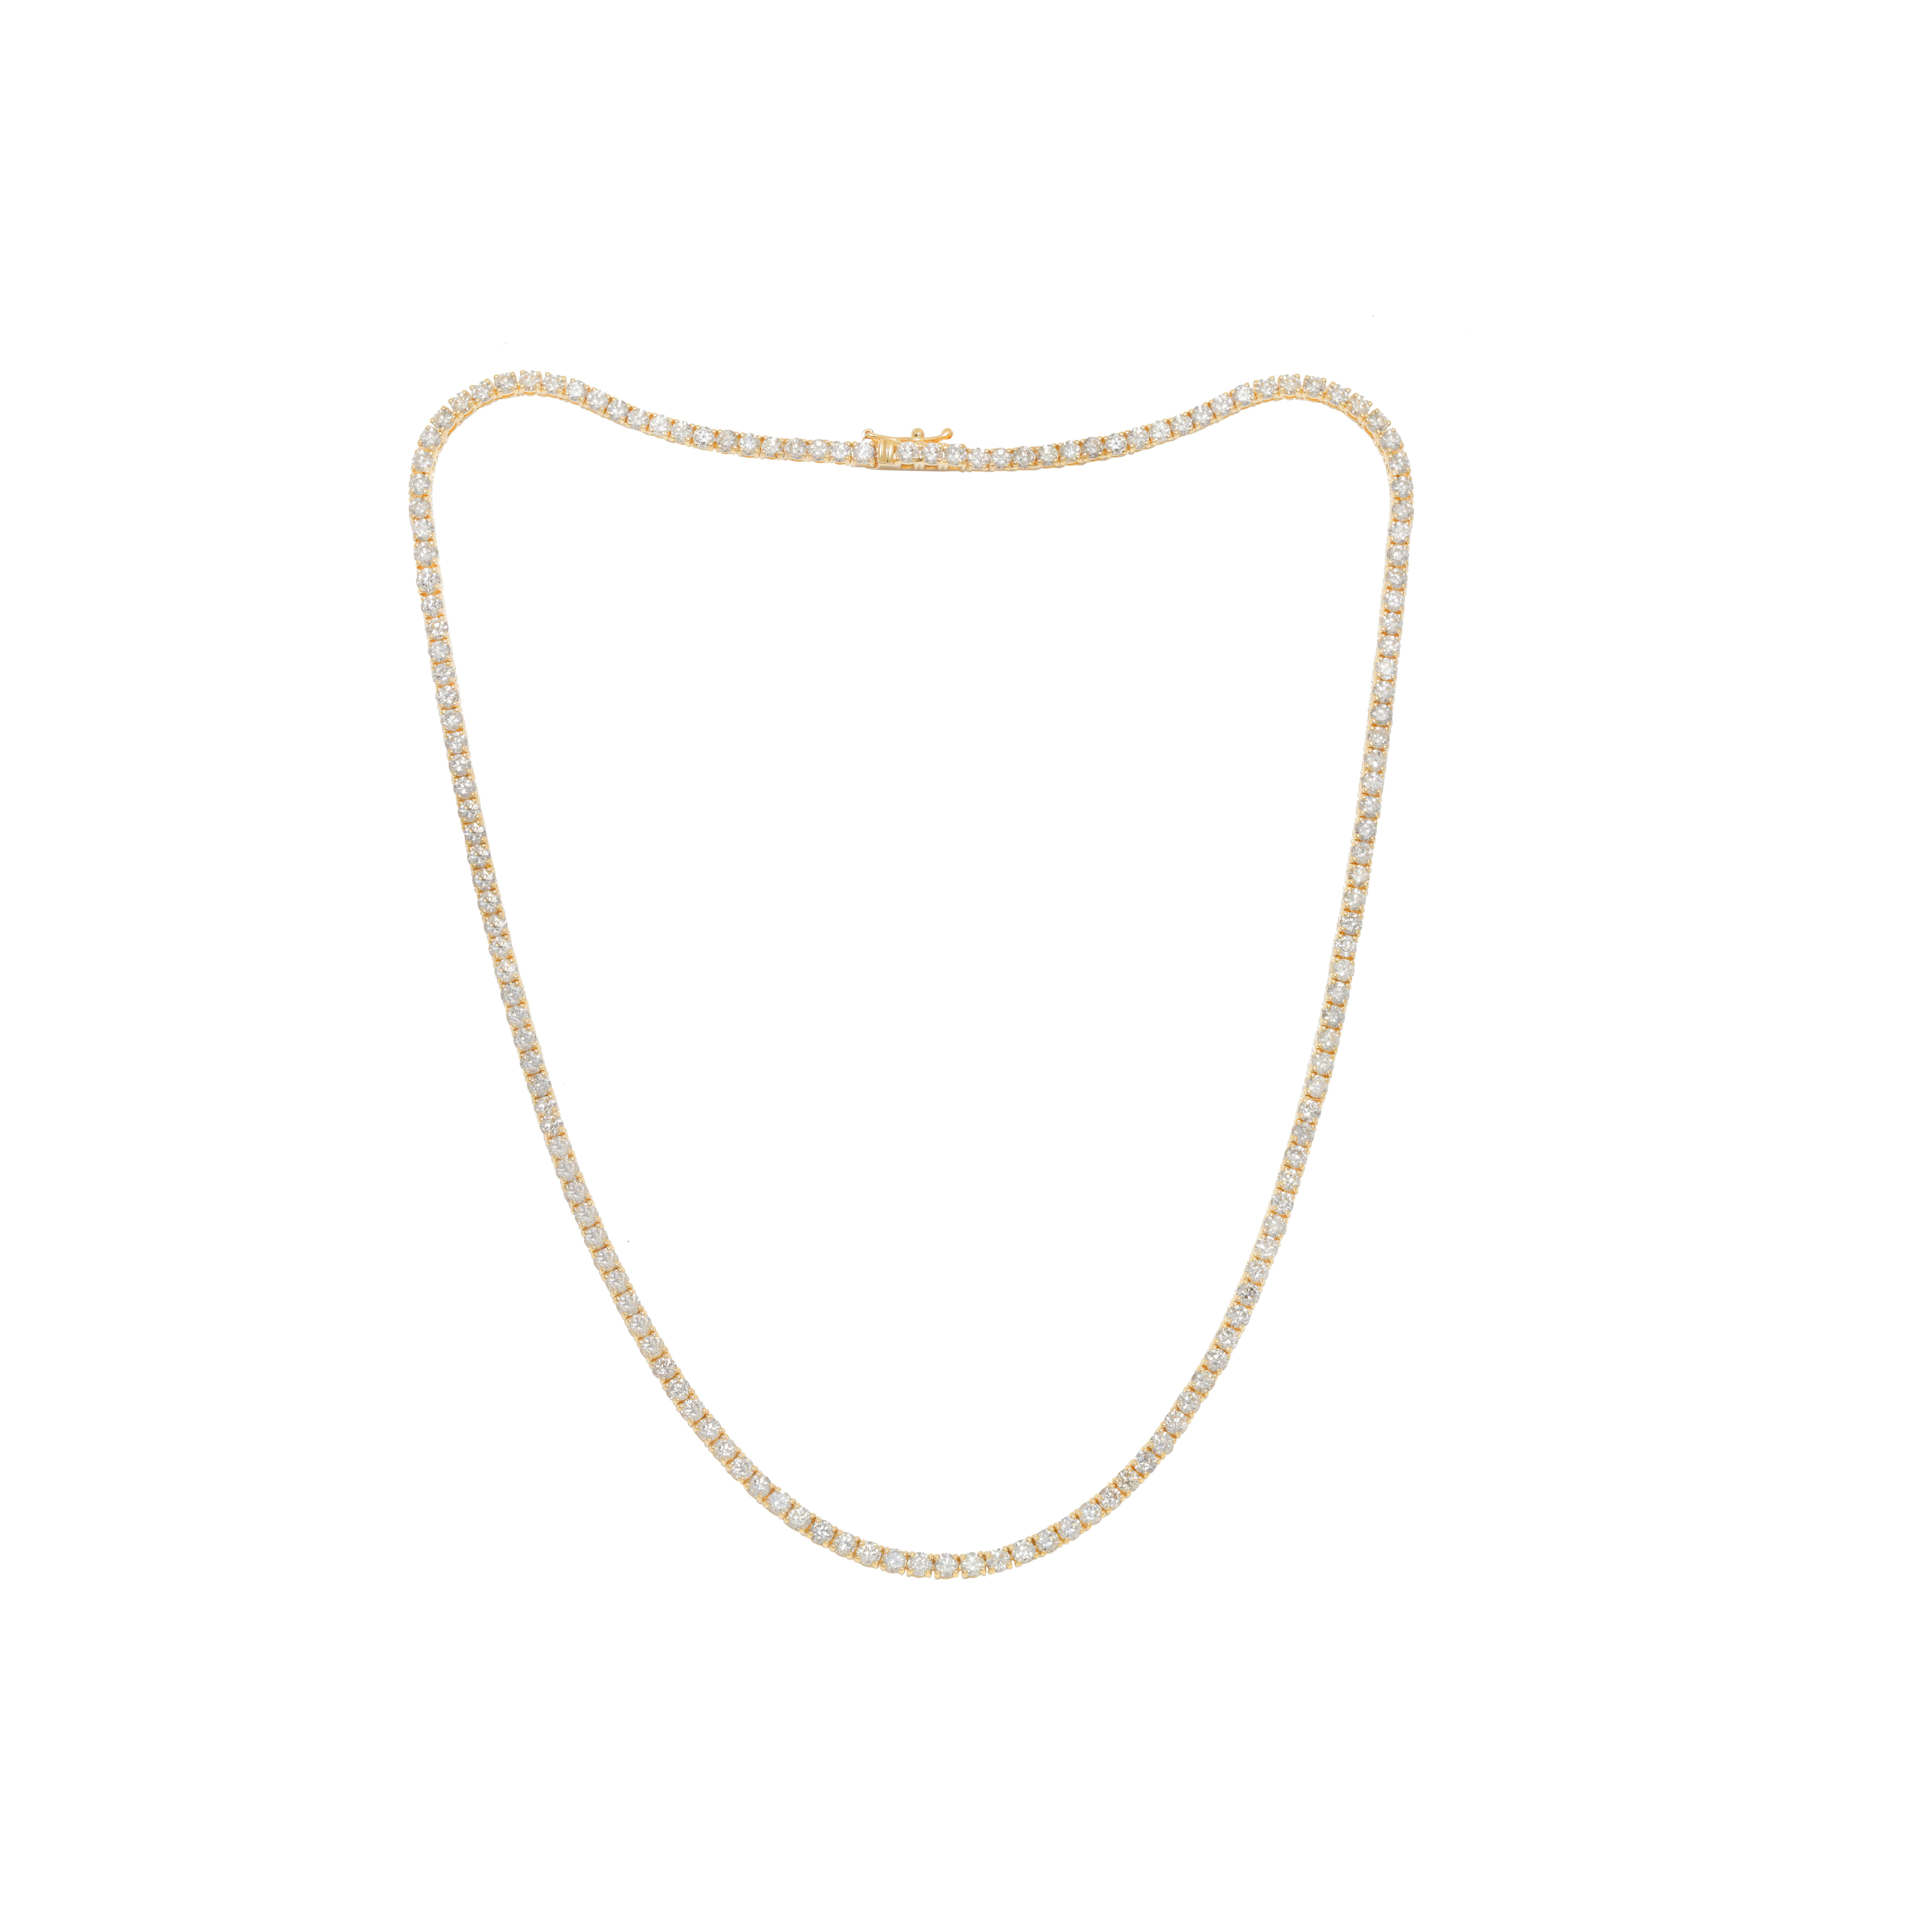 14K Yellow Gold Diamond Straight Line Tennis Necklace Features 11.75Cts of Diamonds. 
Diana M. is a leading supplier of top-quality fine jewelry for over 35 years.
Diana M is one-stop shop for all your jewelry shopping, carrying line of diamond